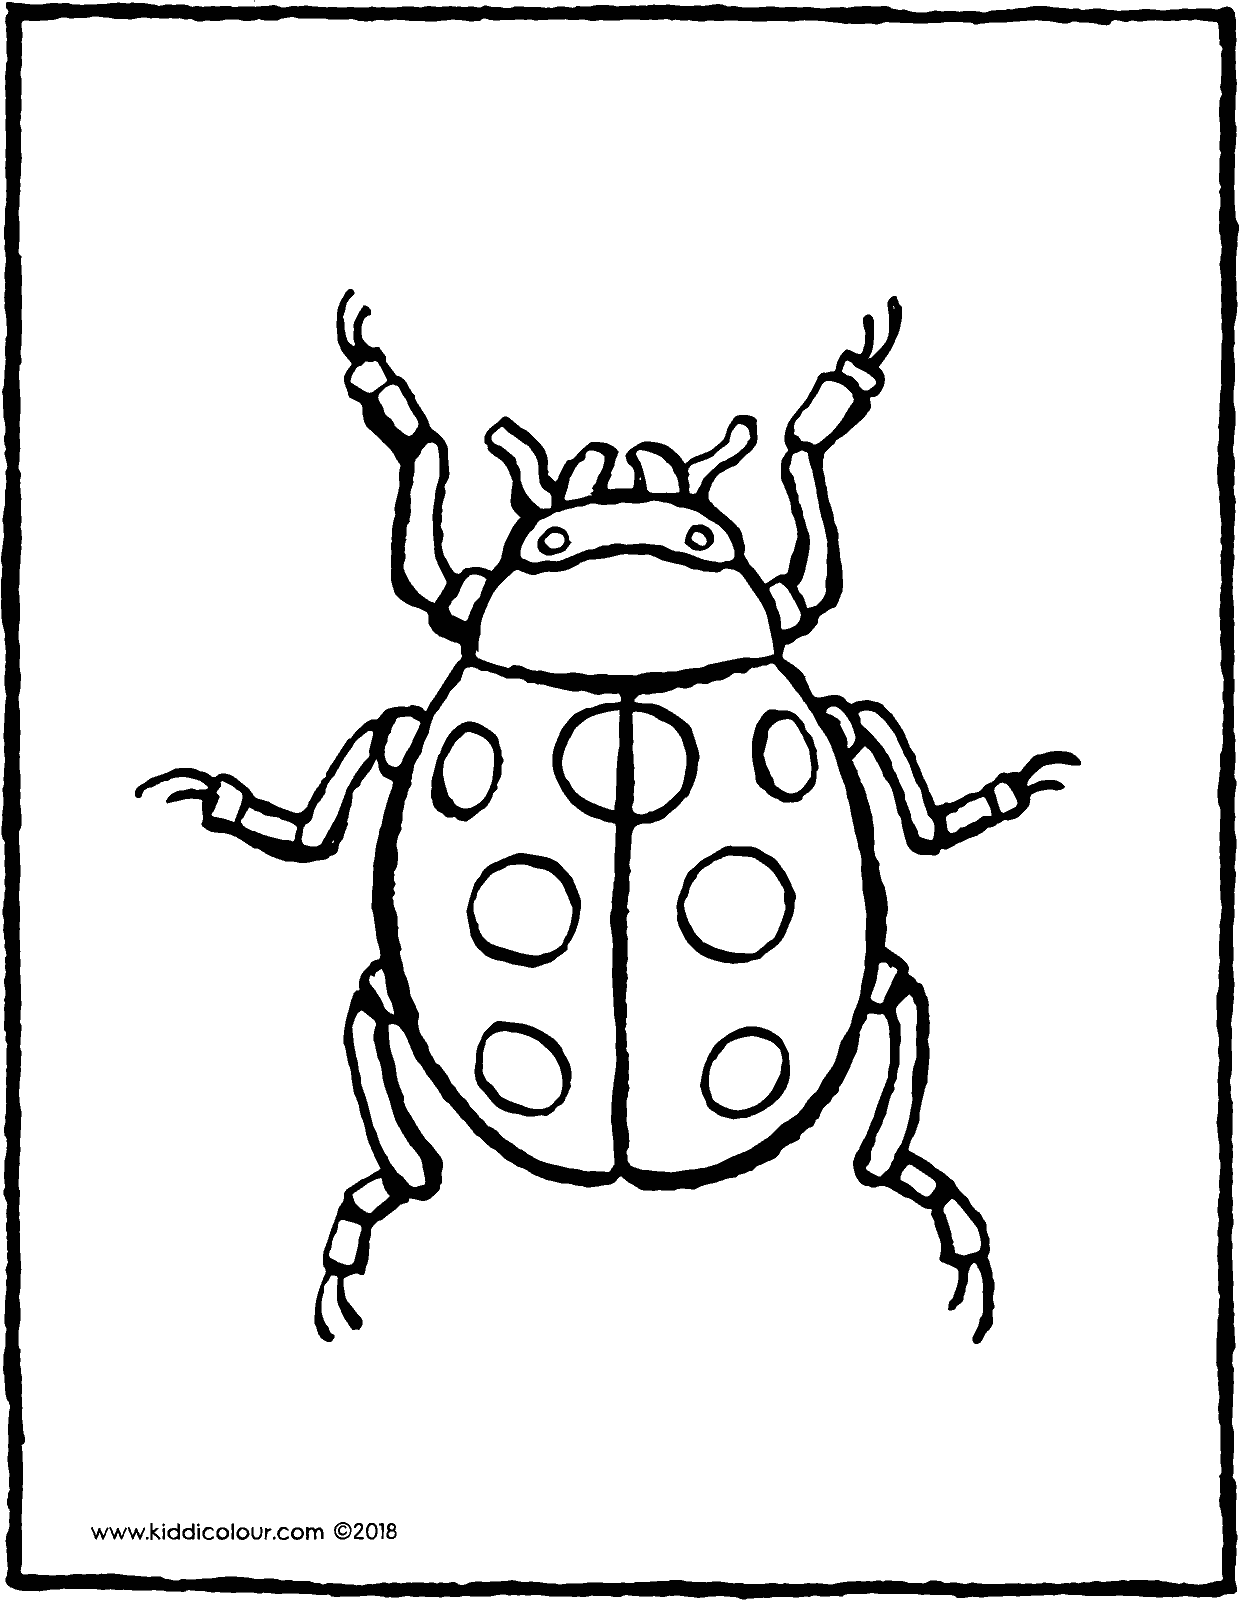 Ladybird Coloring Pages - Coloring Home